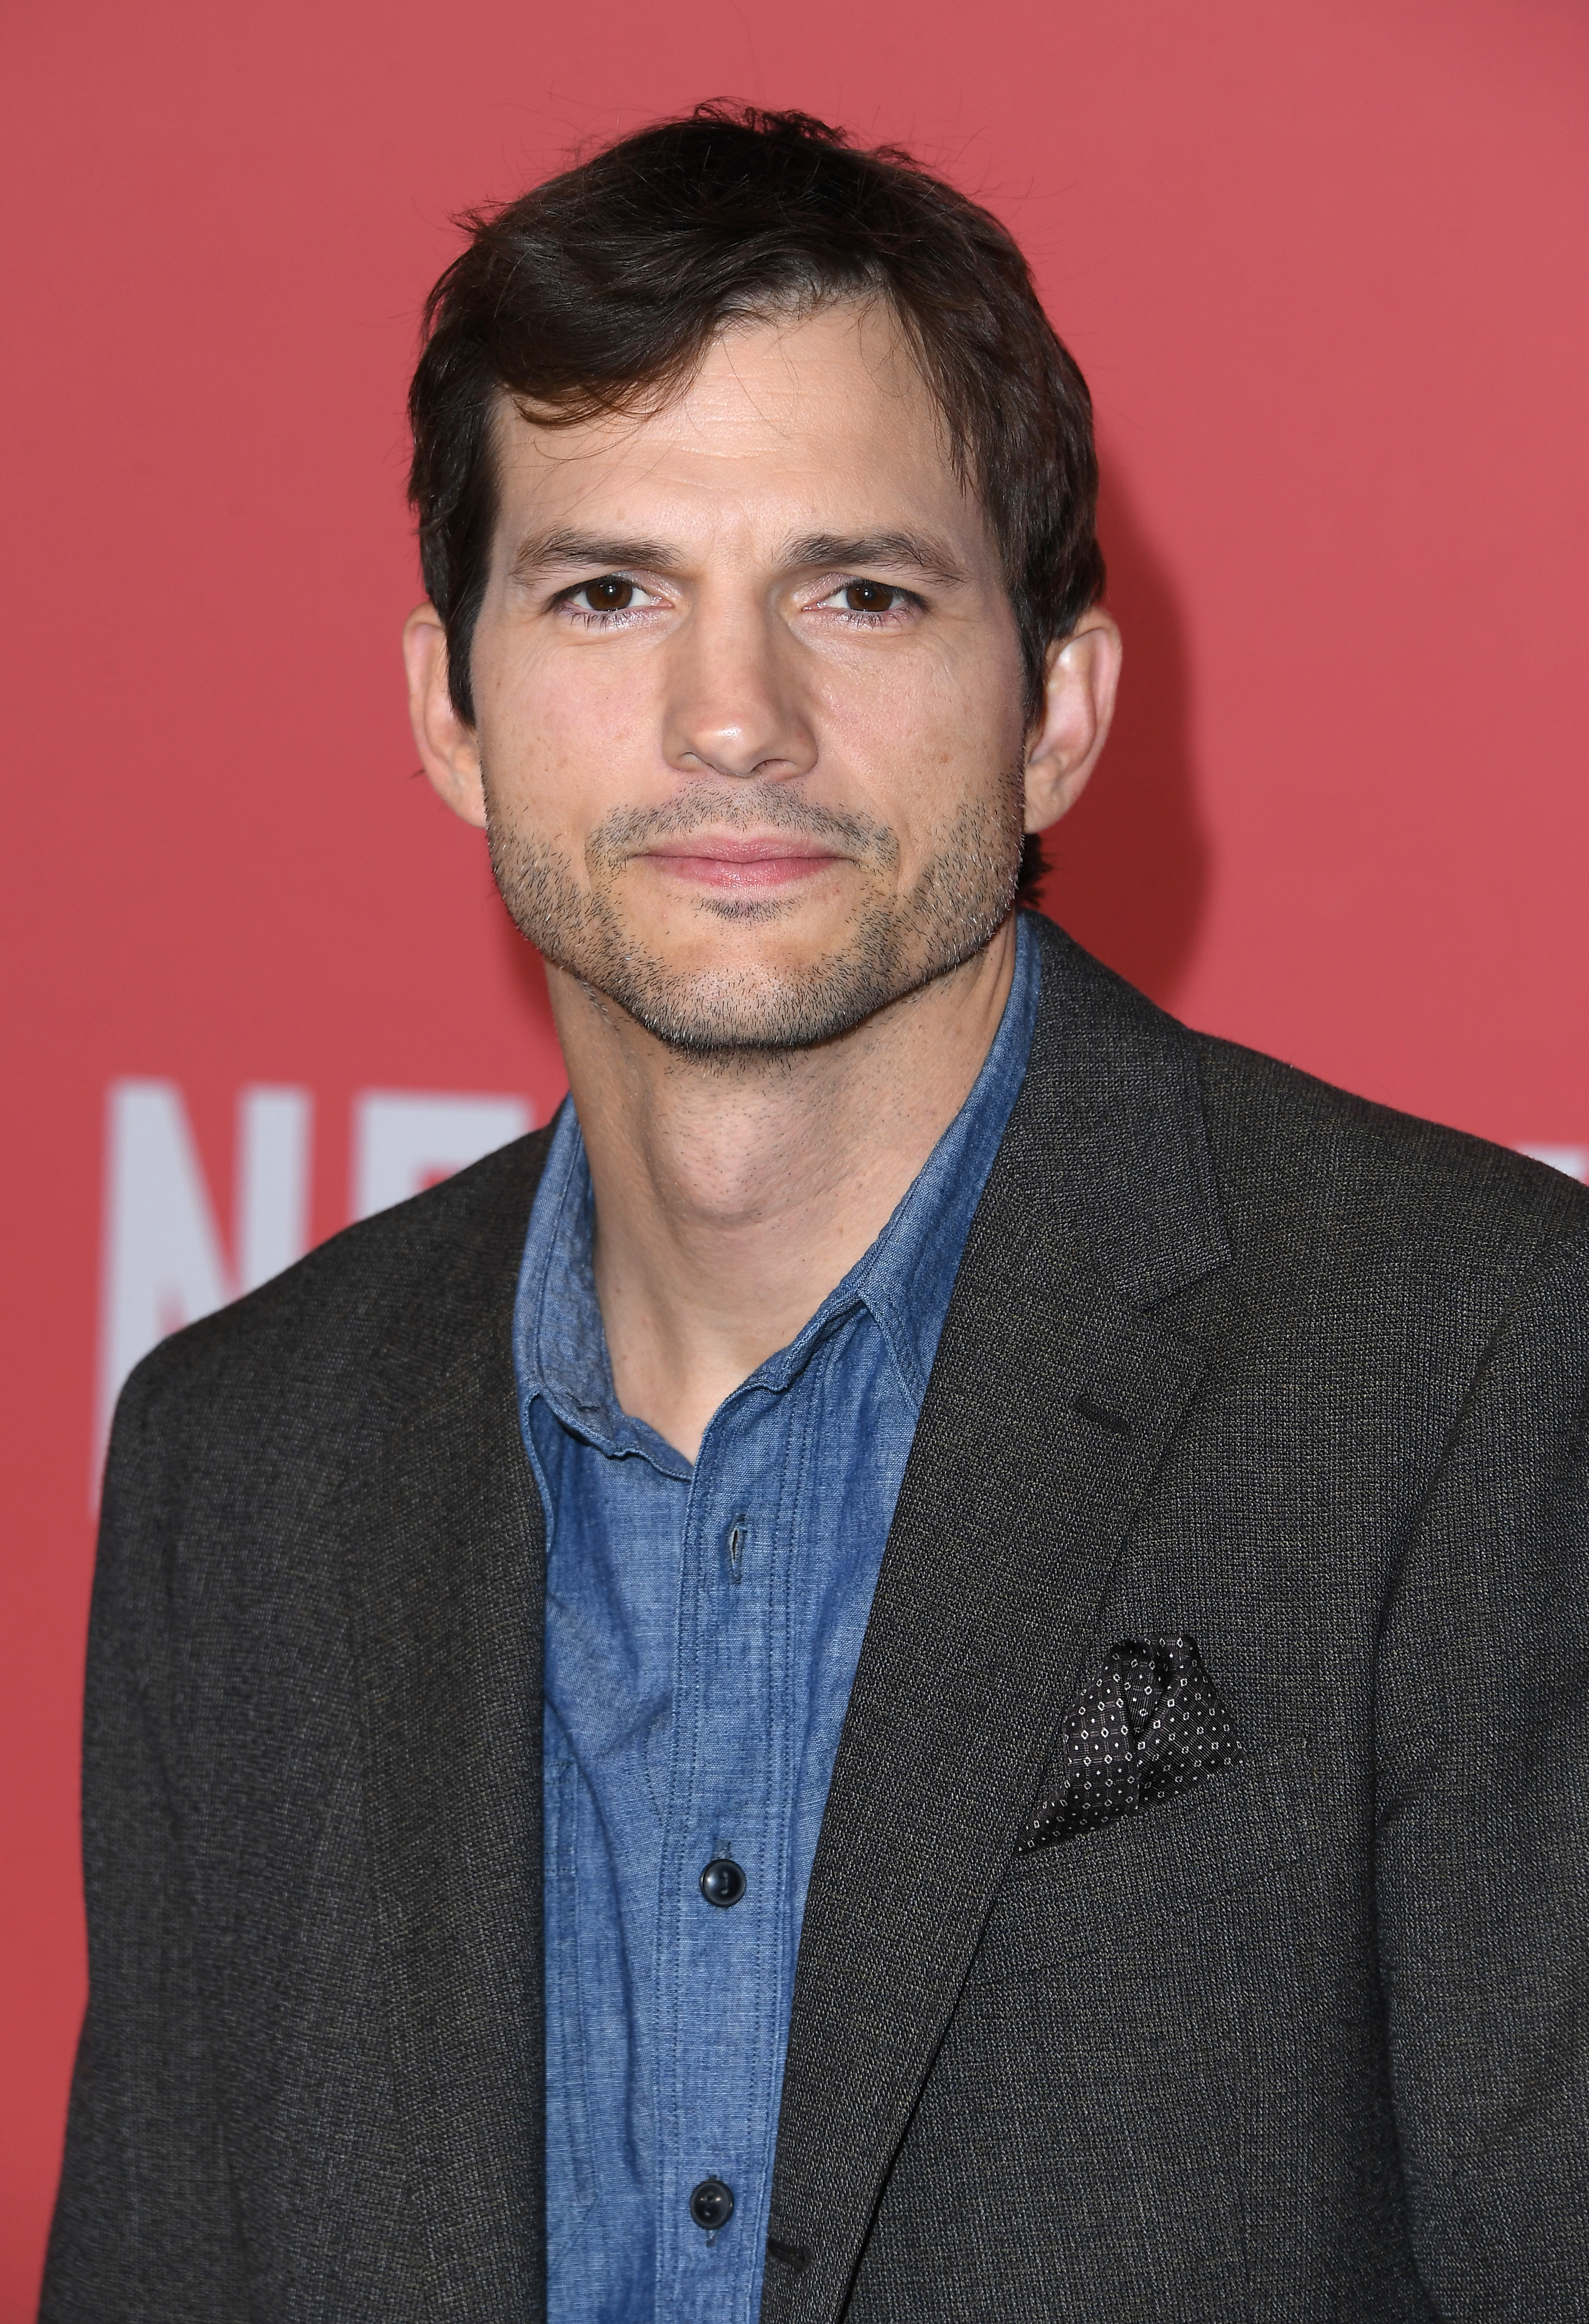 Ashton Kutcher arrives at the World Premiere Of Netflix's "Your Place Or Mine" in Los Angeles, California, on February 2, 2023. | Source: Getty Images